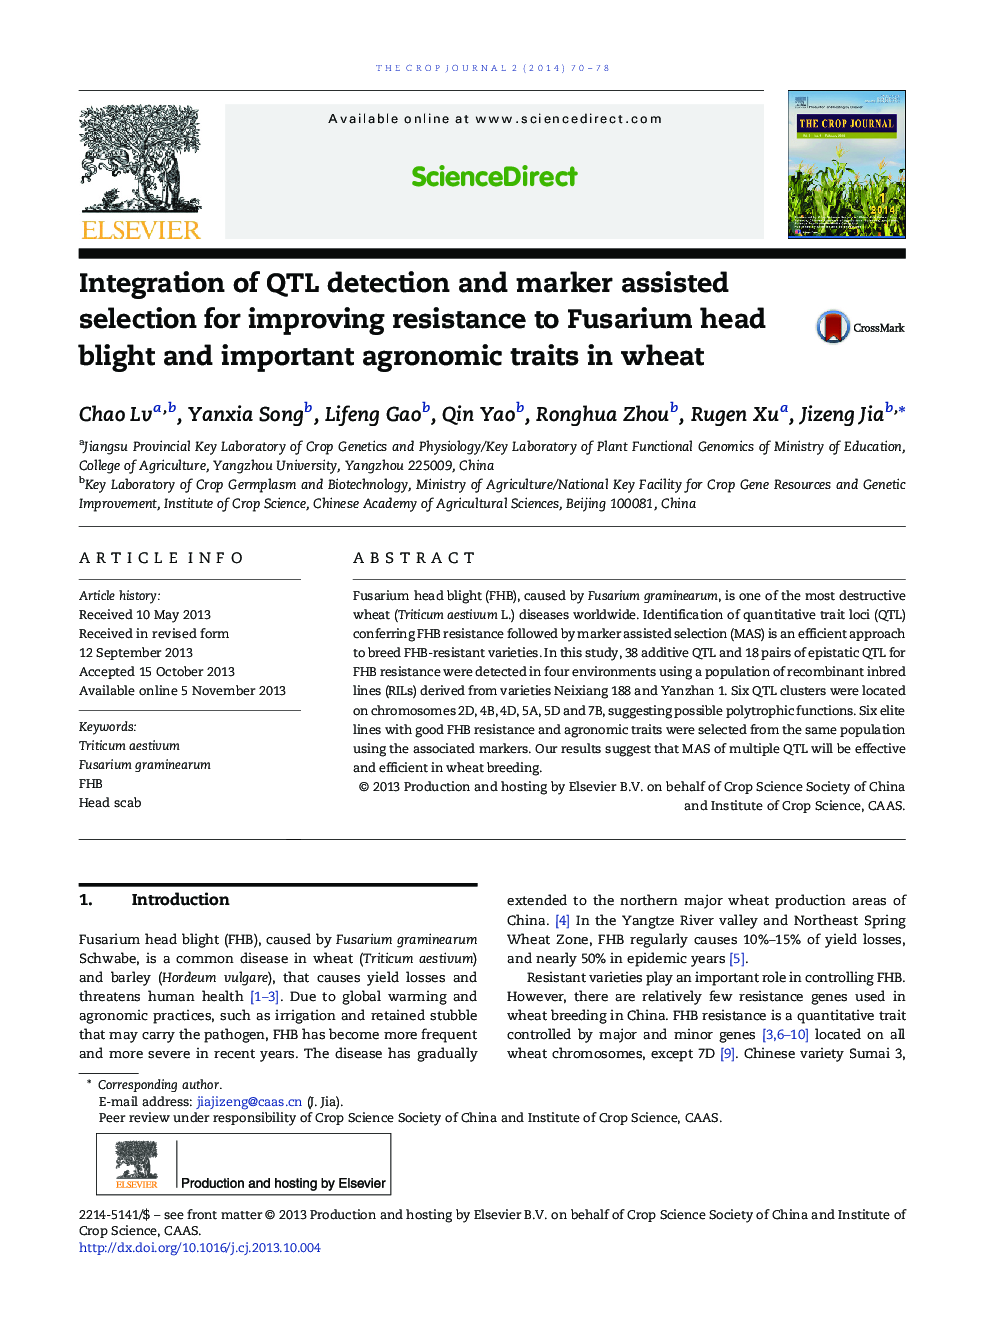 Integration of QTL detection and marker assisted selection for improving resistance to Fusarium head blight and important agronomic traits in wheat 